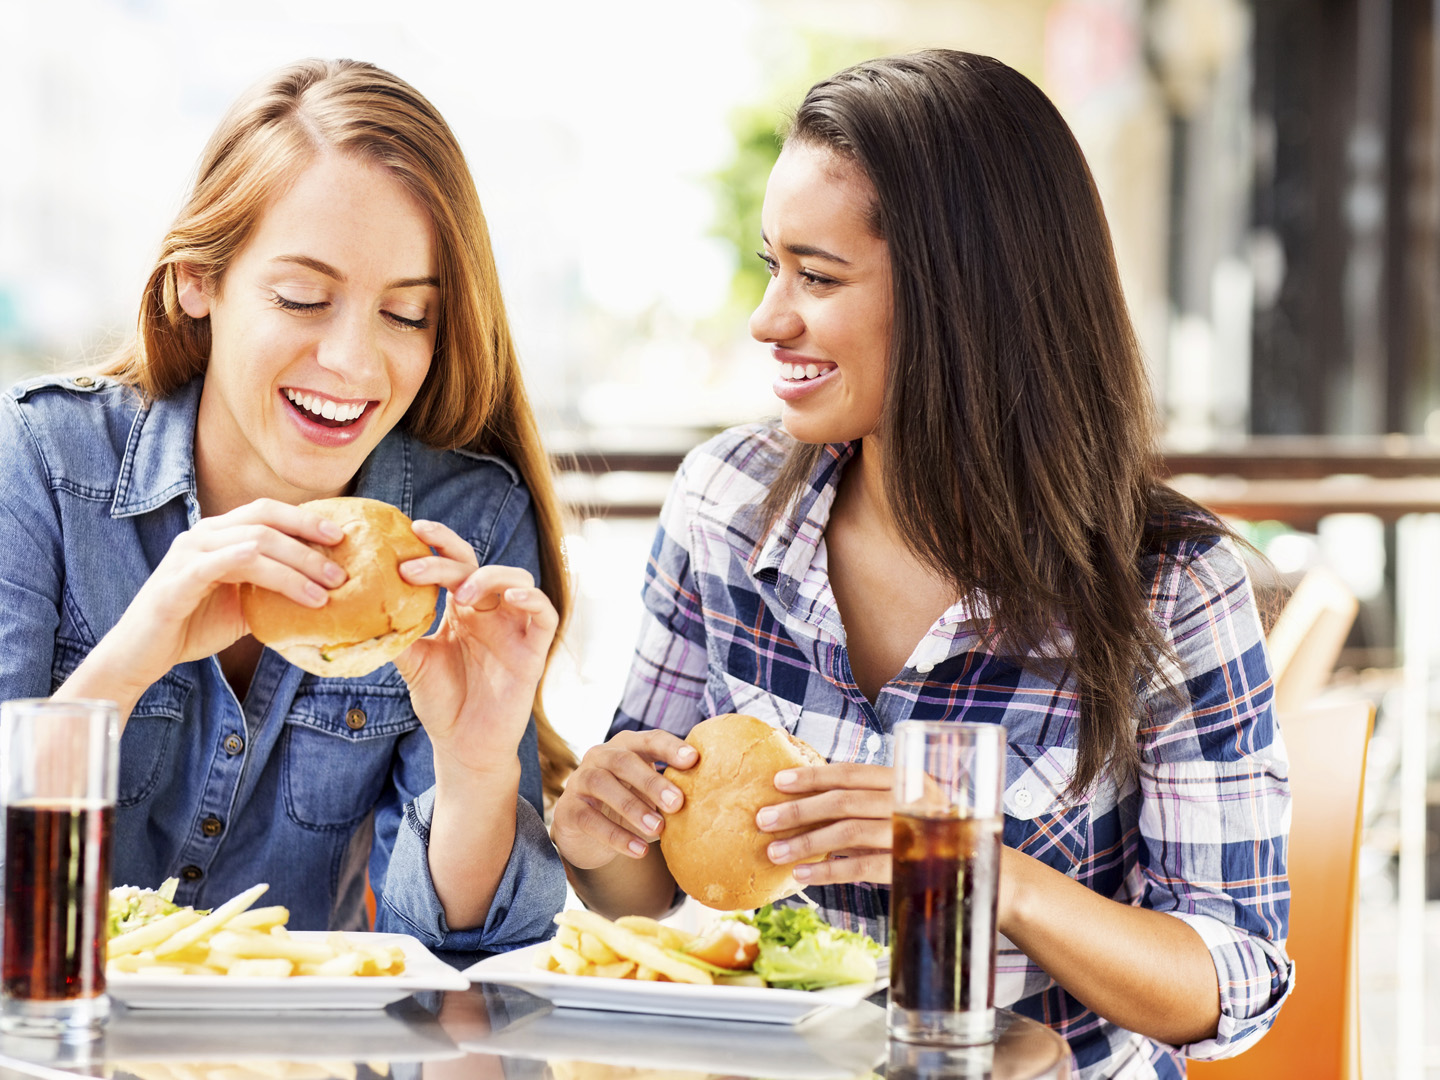 Two teenage girls eating hamburgers at a fast food restaurant.  The girl on the left has long reddish-brown hair and is wearing a denim jacket.  The girl on the right has long dark brown hair and is wearing a blue-and-white plaid shirt.  Each girl is holding a hamburger over a plate of French fries with lettuce on the side.  The two plates are square and white, and each one is sitting next to a soft drink in a tall, clear glass.  The girls are sitting side-by-side at a small, round table.